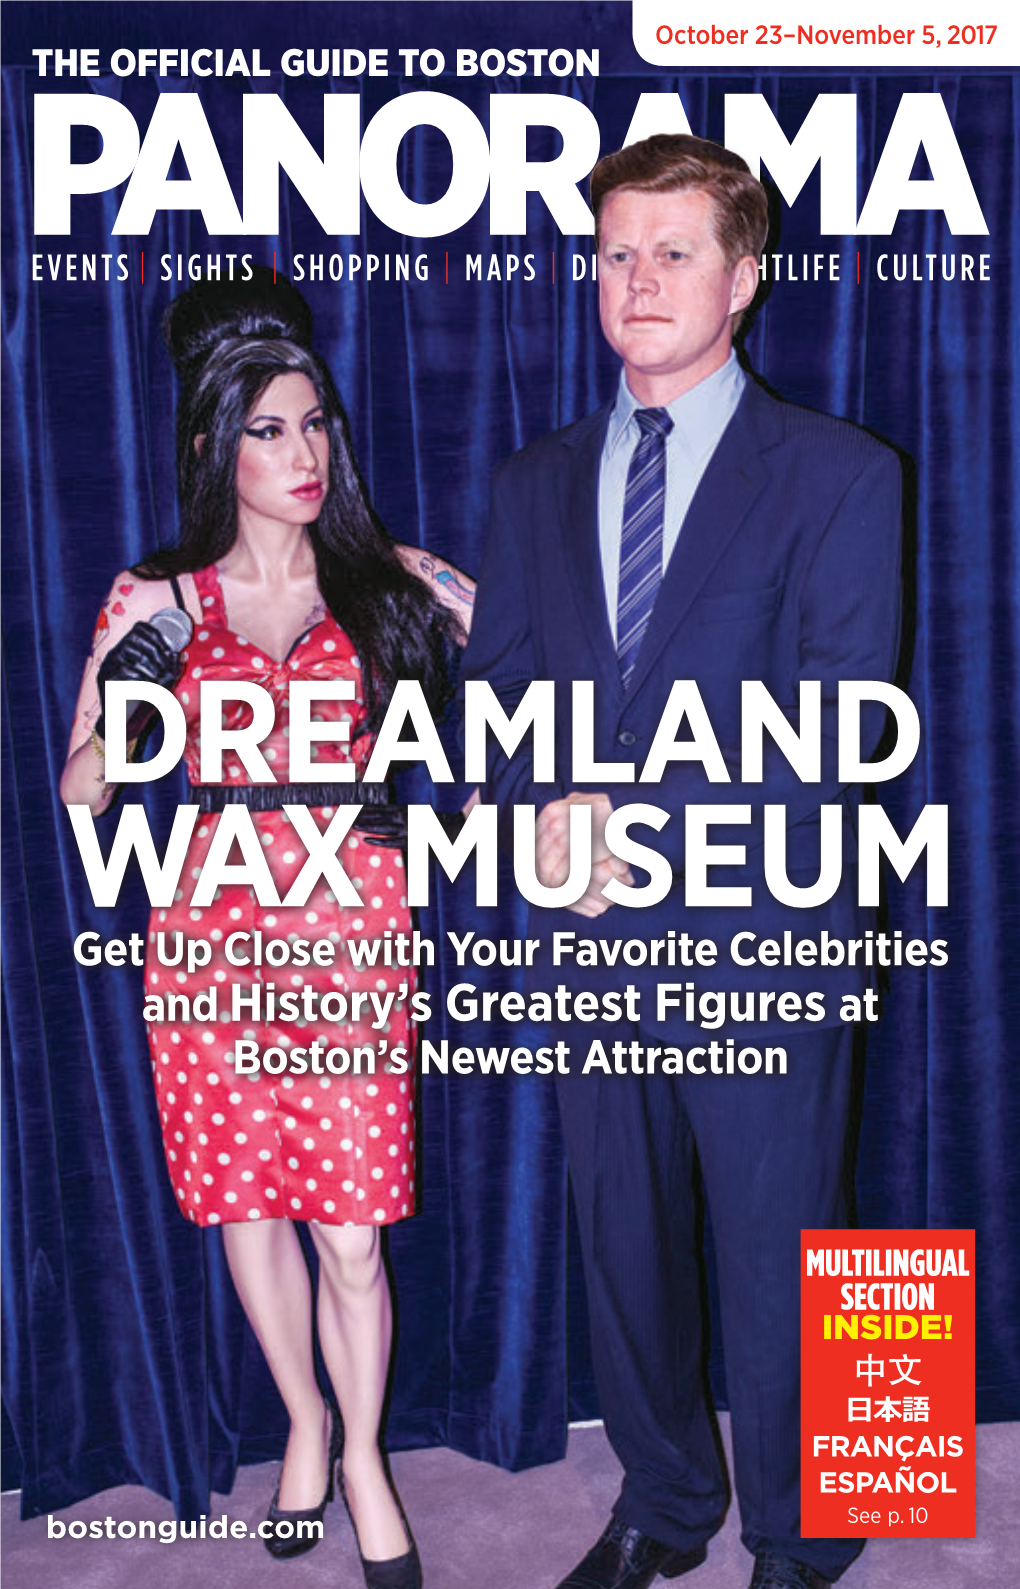 DREAMLAND WAX MUSEUM Get up Close with Your Favorite Celebrities and History’S Greatest Figures at Boston’S Newest Attraction